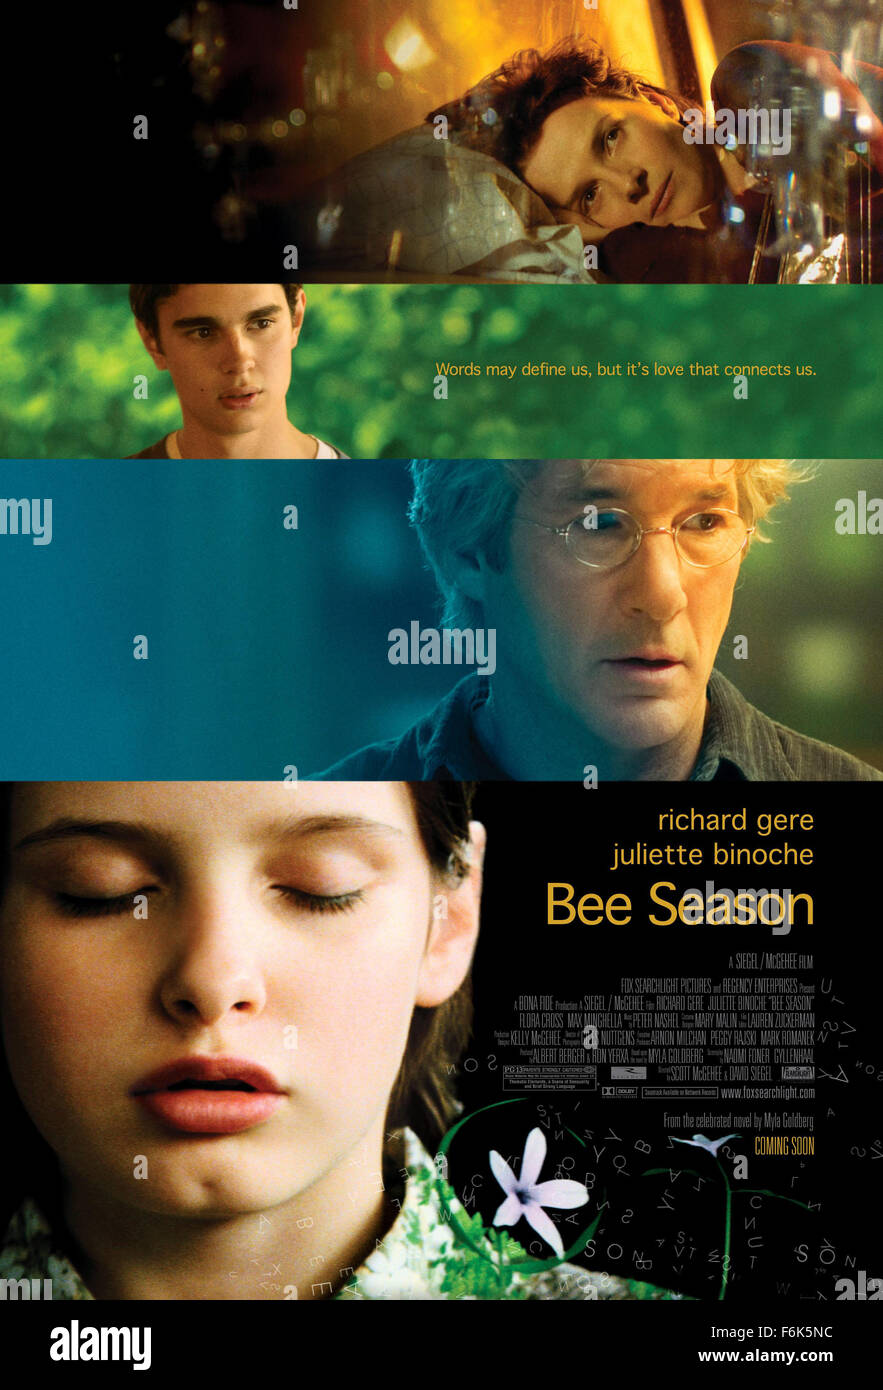 RELEASE DATE: September 3, 2005. MOVIE TITLE: Bee Season. STUDIO: Fox Searchlight. PLOT: A wife and mother begins a downward emotional spiral, as her husband avoids their collapsing marriage by immersing himself in his 11 year-old daughter's quest to become a spelling bee champion. PICTURED: RICHARD GERE as Saul Naumann, MAX MINGHELLA as Aaron Naumann, FLORA CROSS as Eliza Naumann and JULIETTE BINOCHE as Miriam Neumann. Stock Photo